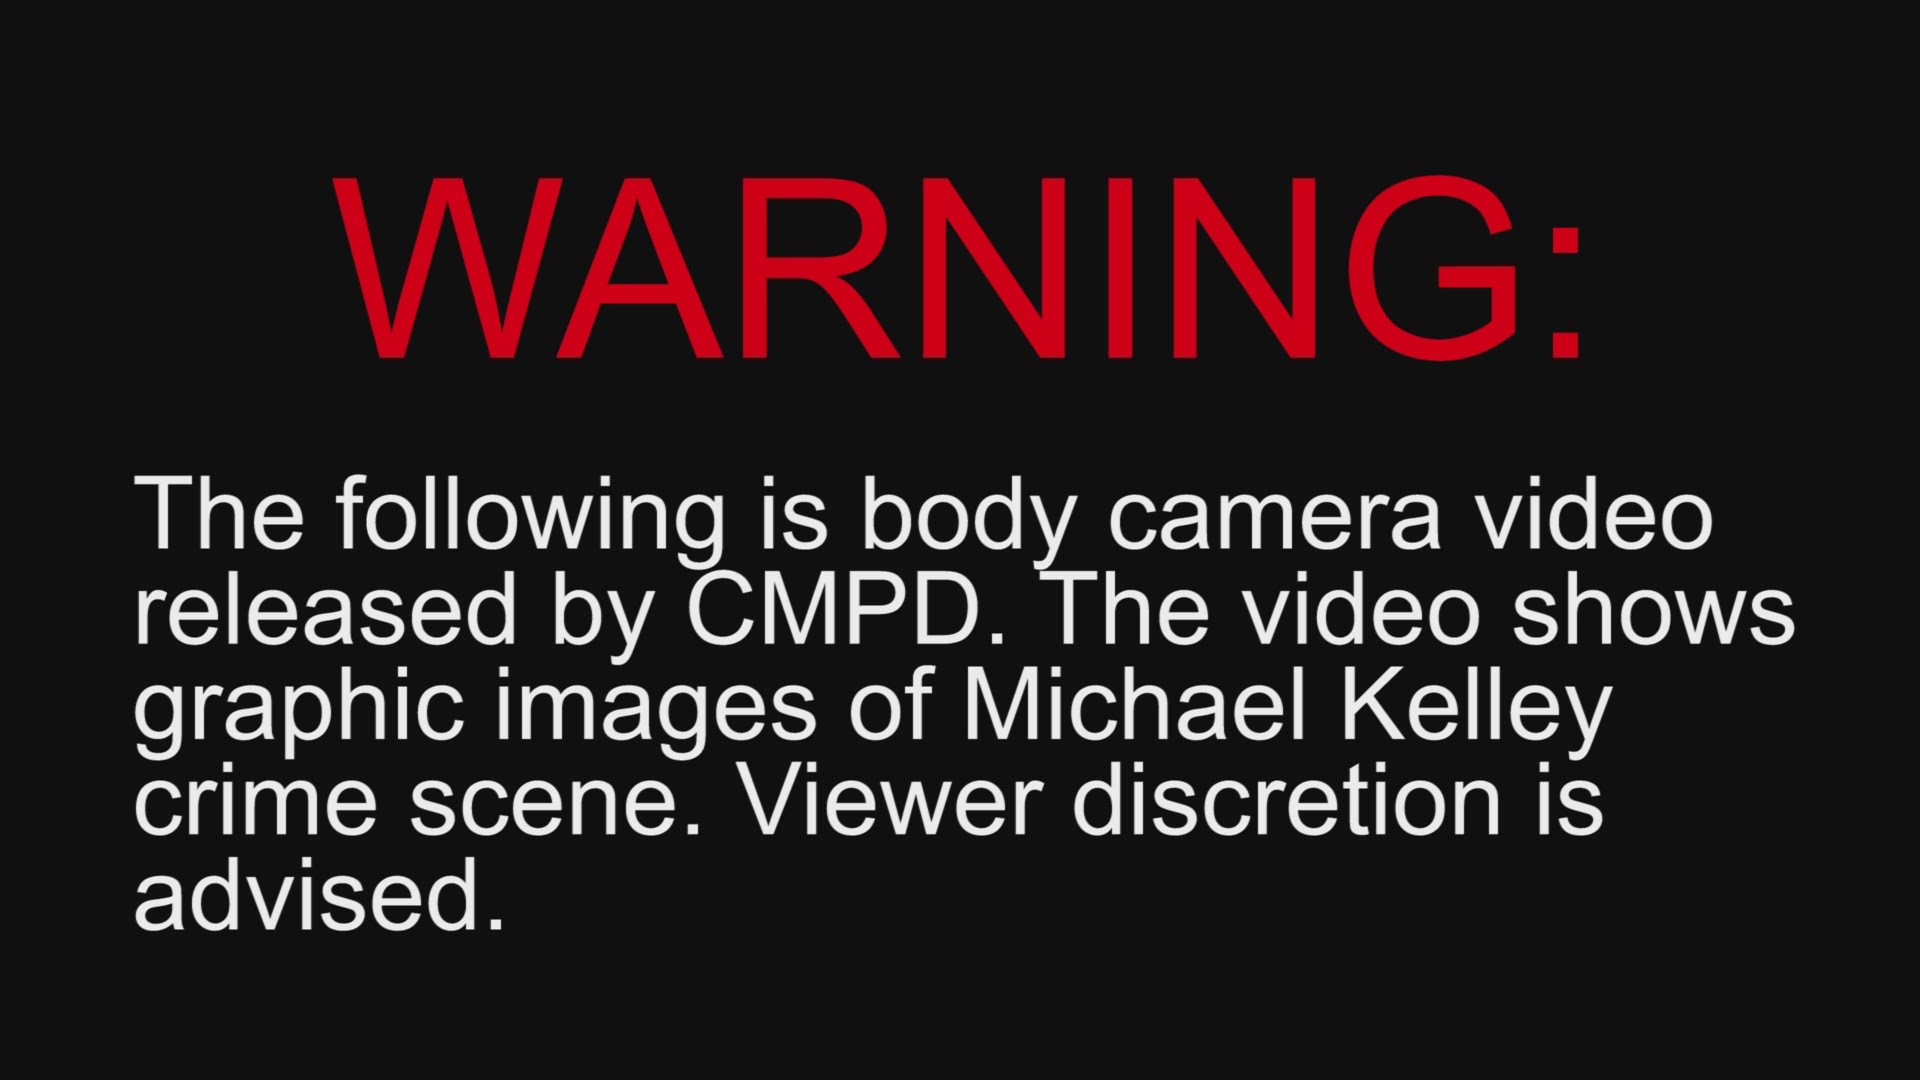 WARNING: The following is body camera video released by CMPD. The video shows graphic images of Michael Kelley crime scene. Viewer discretion is advised.